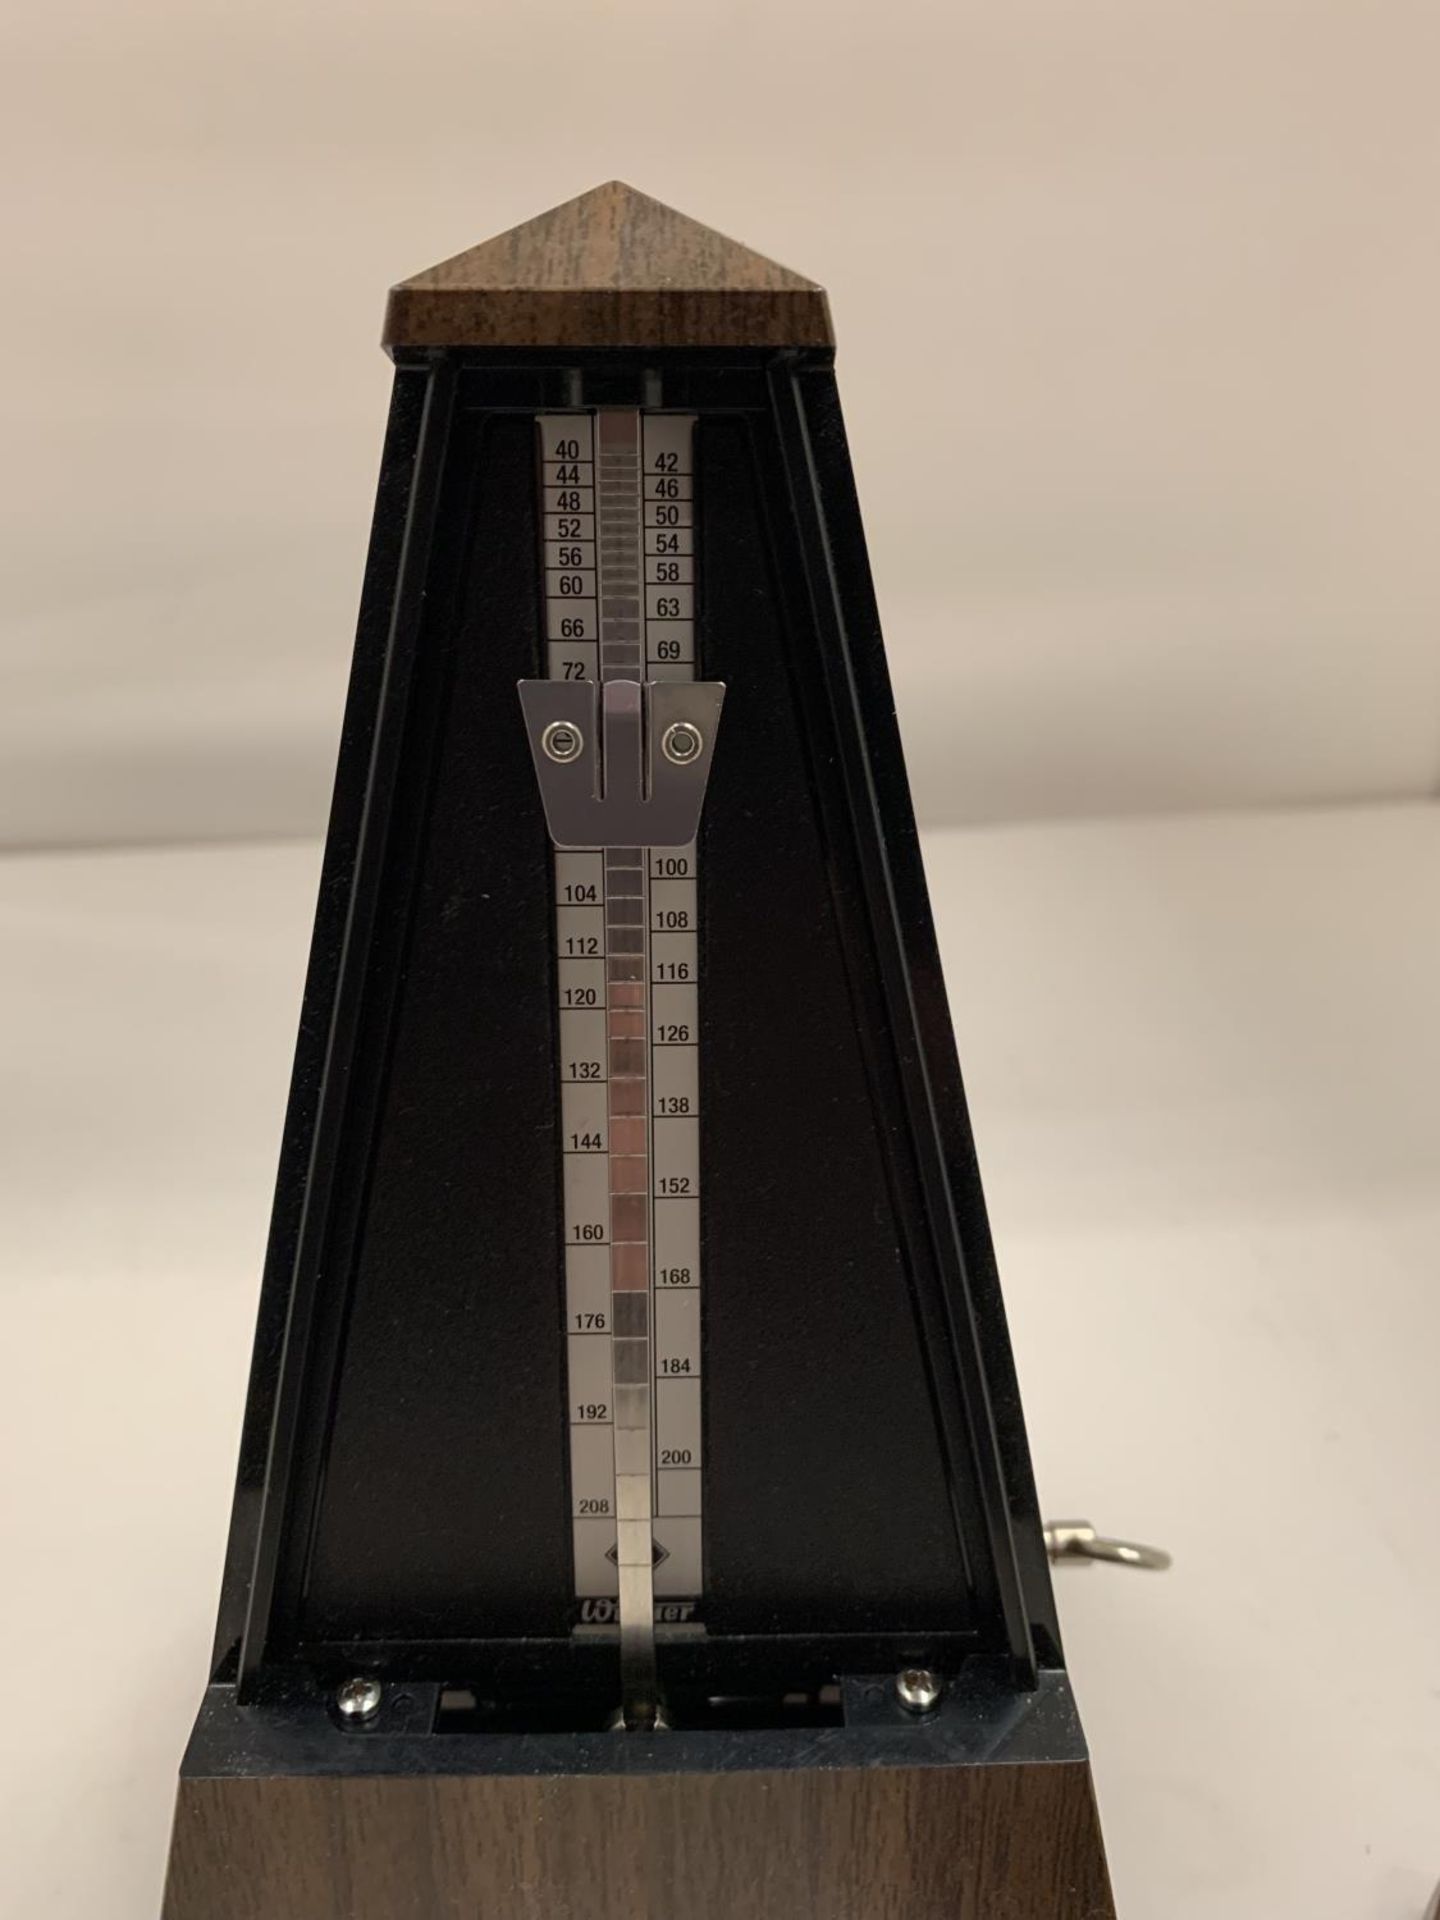 A WITTNER METRONOME - Image 4 of 4